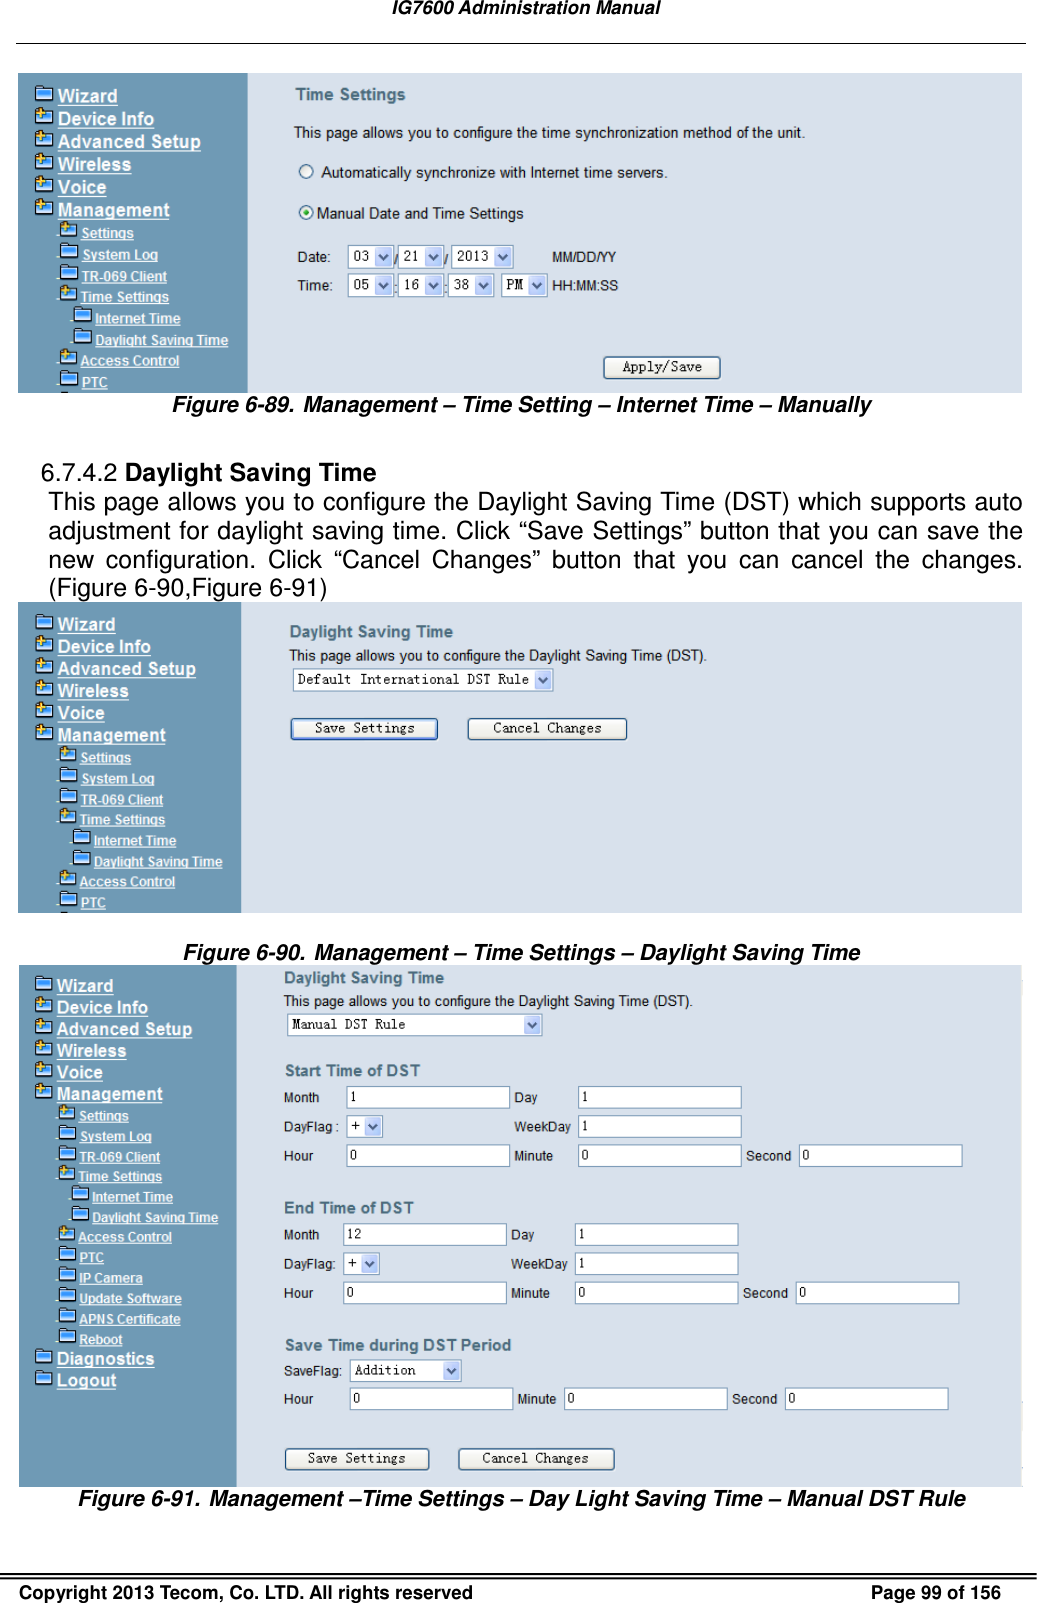   IG7600 Administration Manual  Copyright 2013 Tecom, Co. LTD. All rights reserved  Page 99 of 156  Figure 6-89. Management – Time Setting – Internet Time – Manually  6.7.4.2 Daylight Saving Time This page allows you to configure the Daylight Saving Time (DST) which supports auto adjustment for daylight saving time. Click “Save Settings” button that you can save the new  configuration.  Click  “Cancel  Changes”  button  that  you  can  cancel  the  changes. (Figure 6-90,Figure 6-91)   Figure 6-90. Management – Time Settings – Daylight Saving Time   Figure 6-91. Management –Time Settings – Day Light Saving Time – Manual DST Rule 